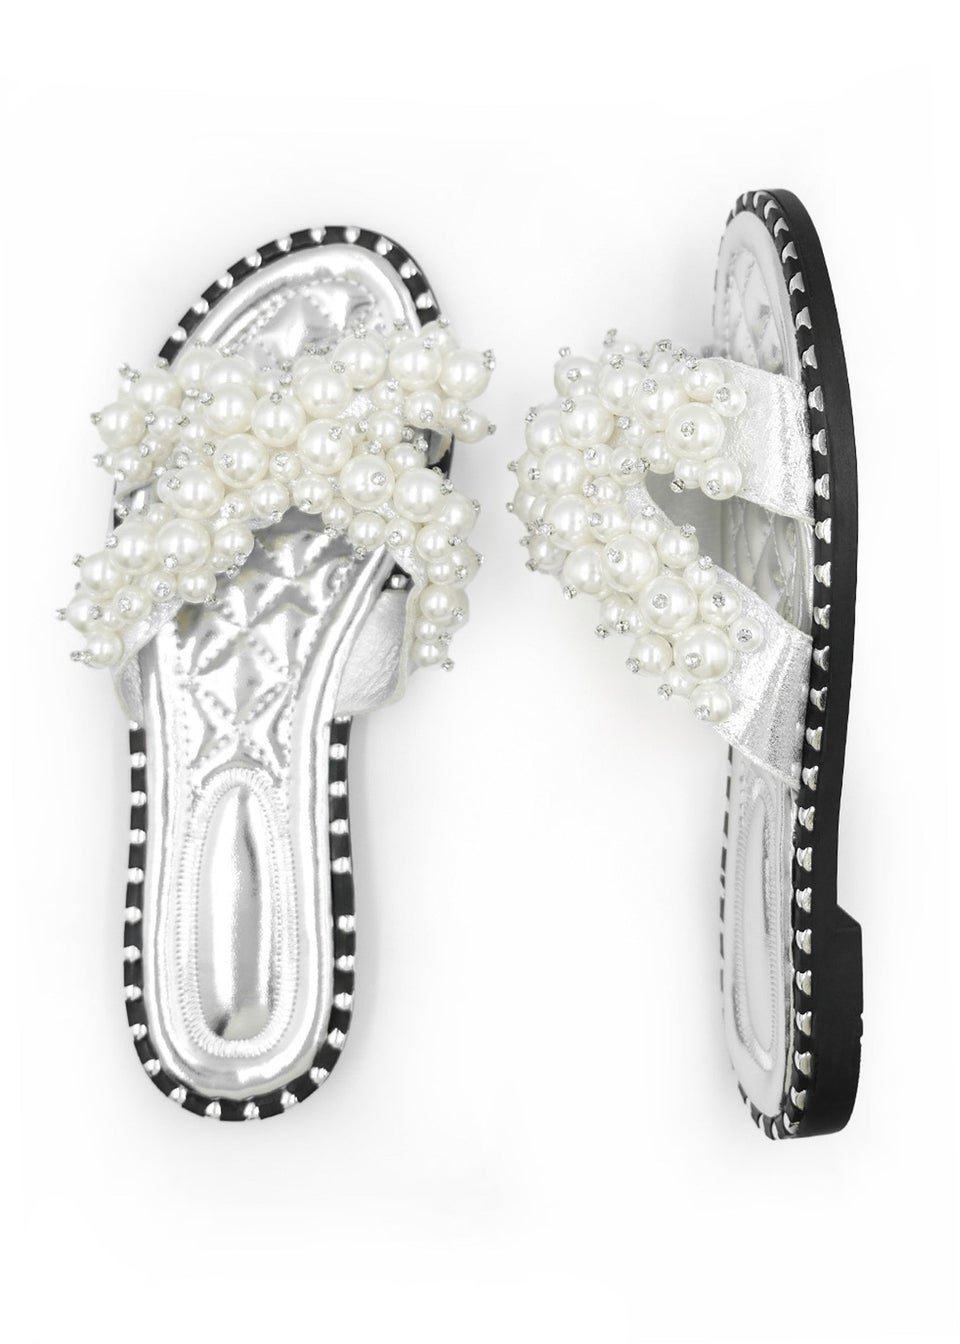 Where's That From Silver Eve Pearl Embellished Flat Slider Sandals